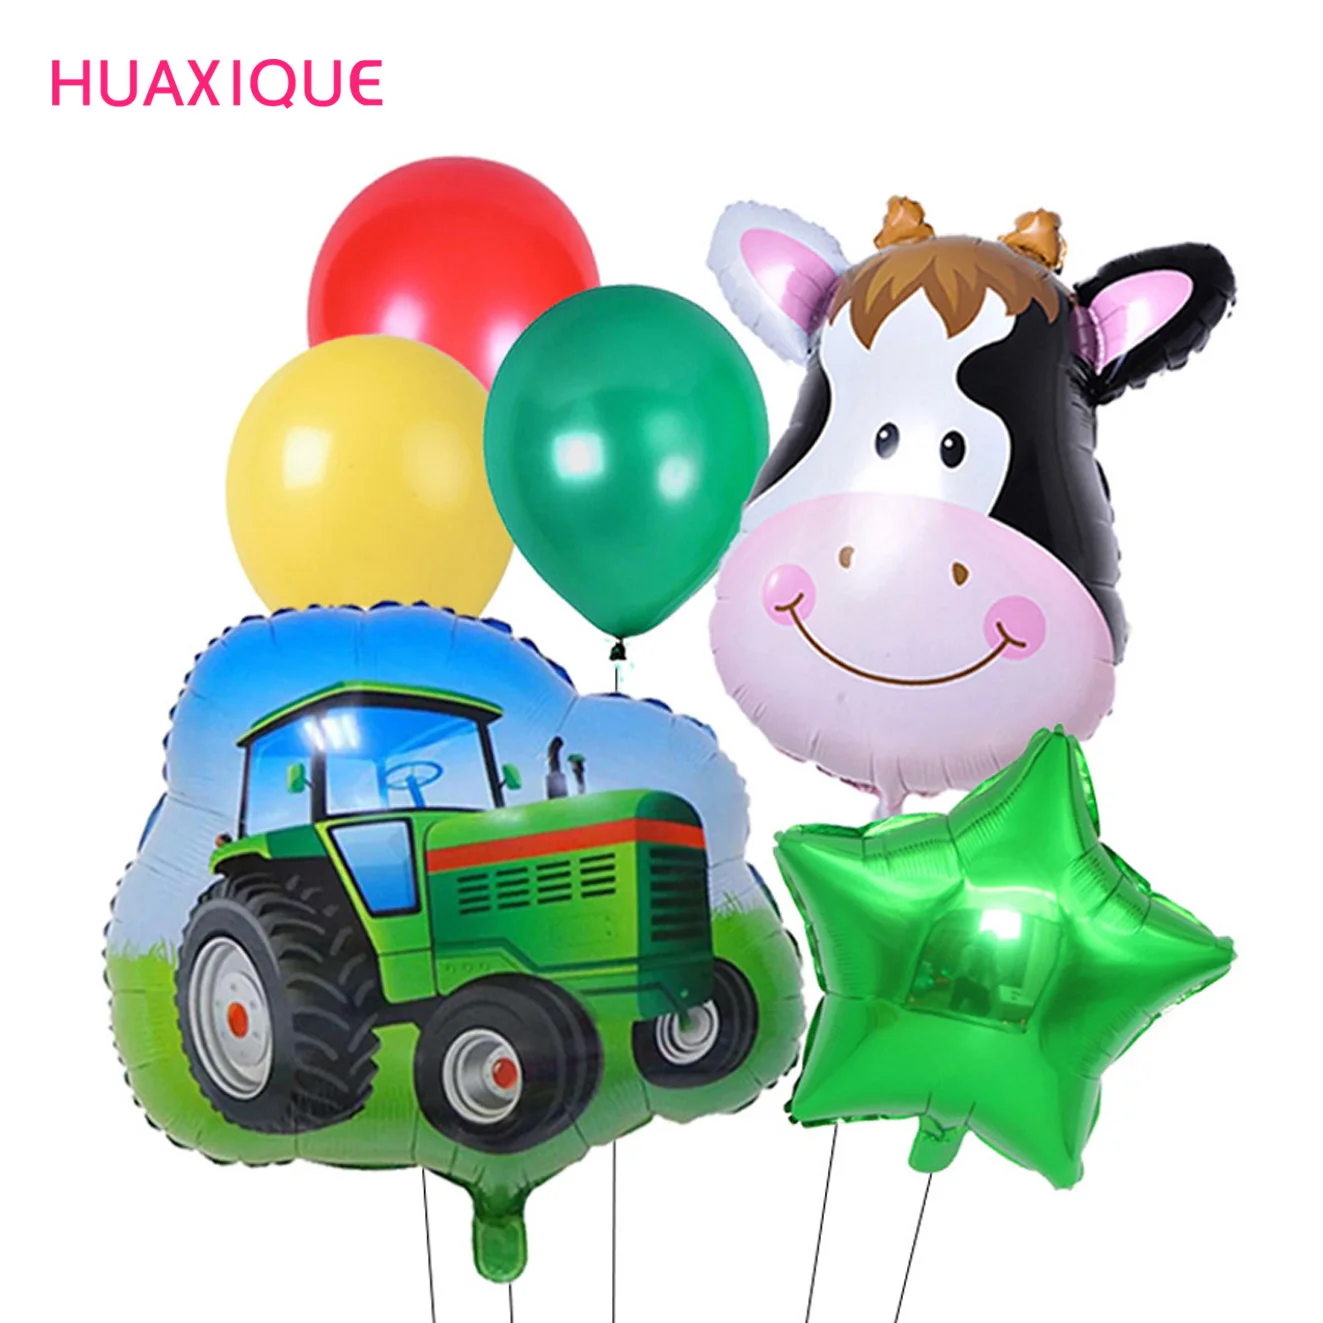 

18pcs Farm Theme Green Tractor Inflatable Balloons Happy Birthday Party Decor Cow Balloon Kids Excavator Vehicle Fire Truck Ball